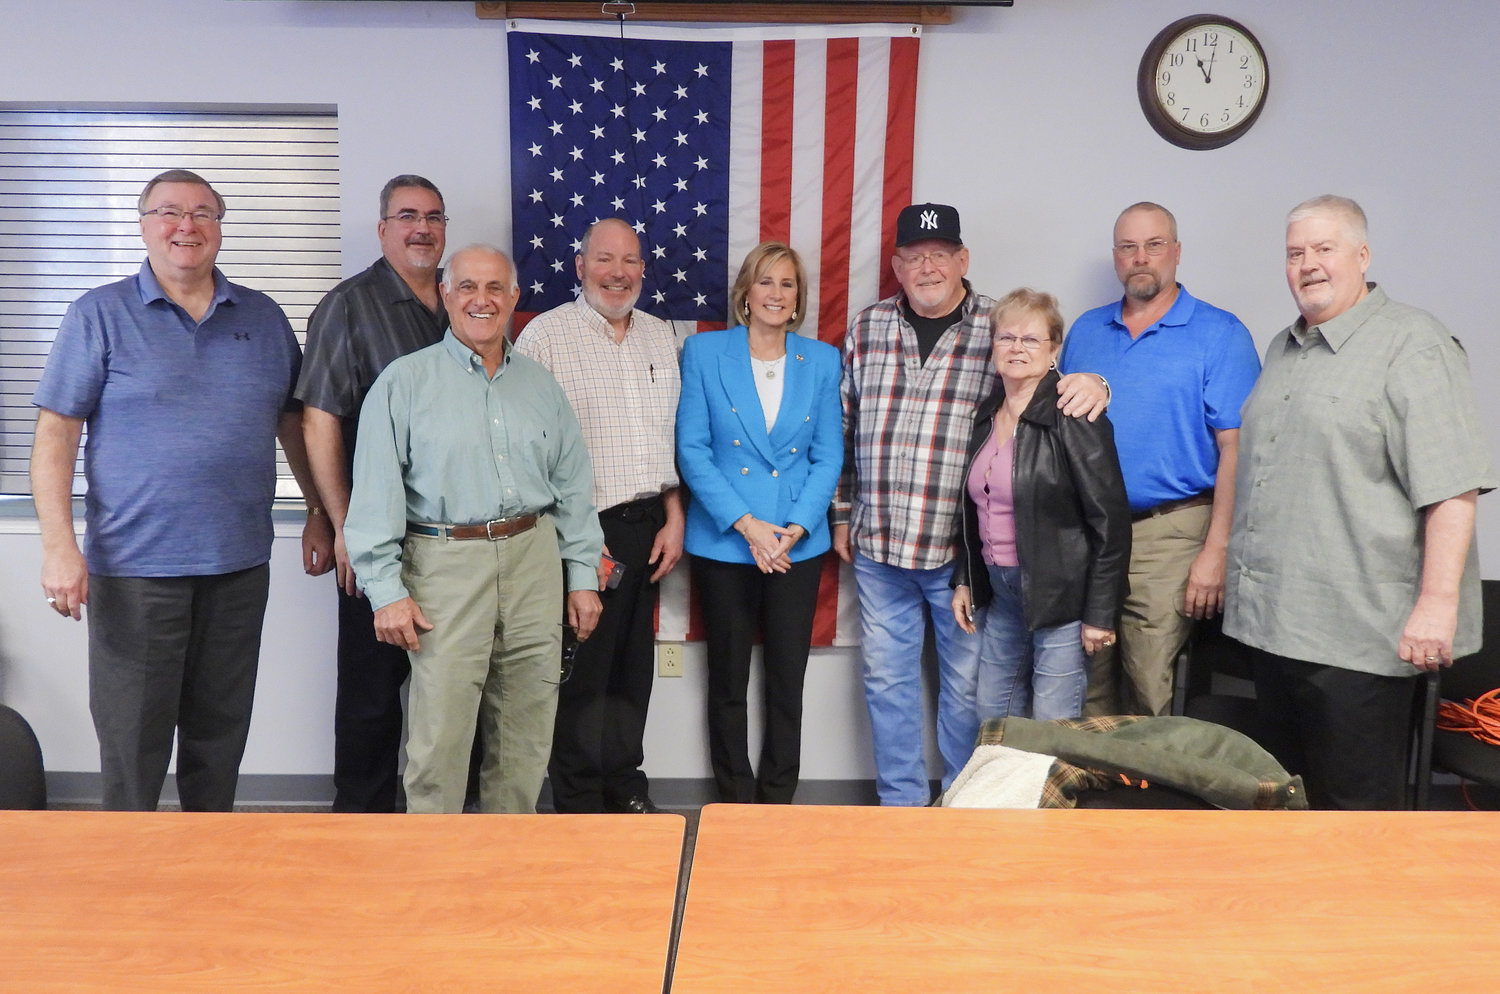 Congresswoman Claudia Tenney stands with Vernon town officials and local residents, congratulating Vernon on receiving $3 million from the federal government to fund a much needed water project